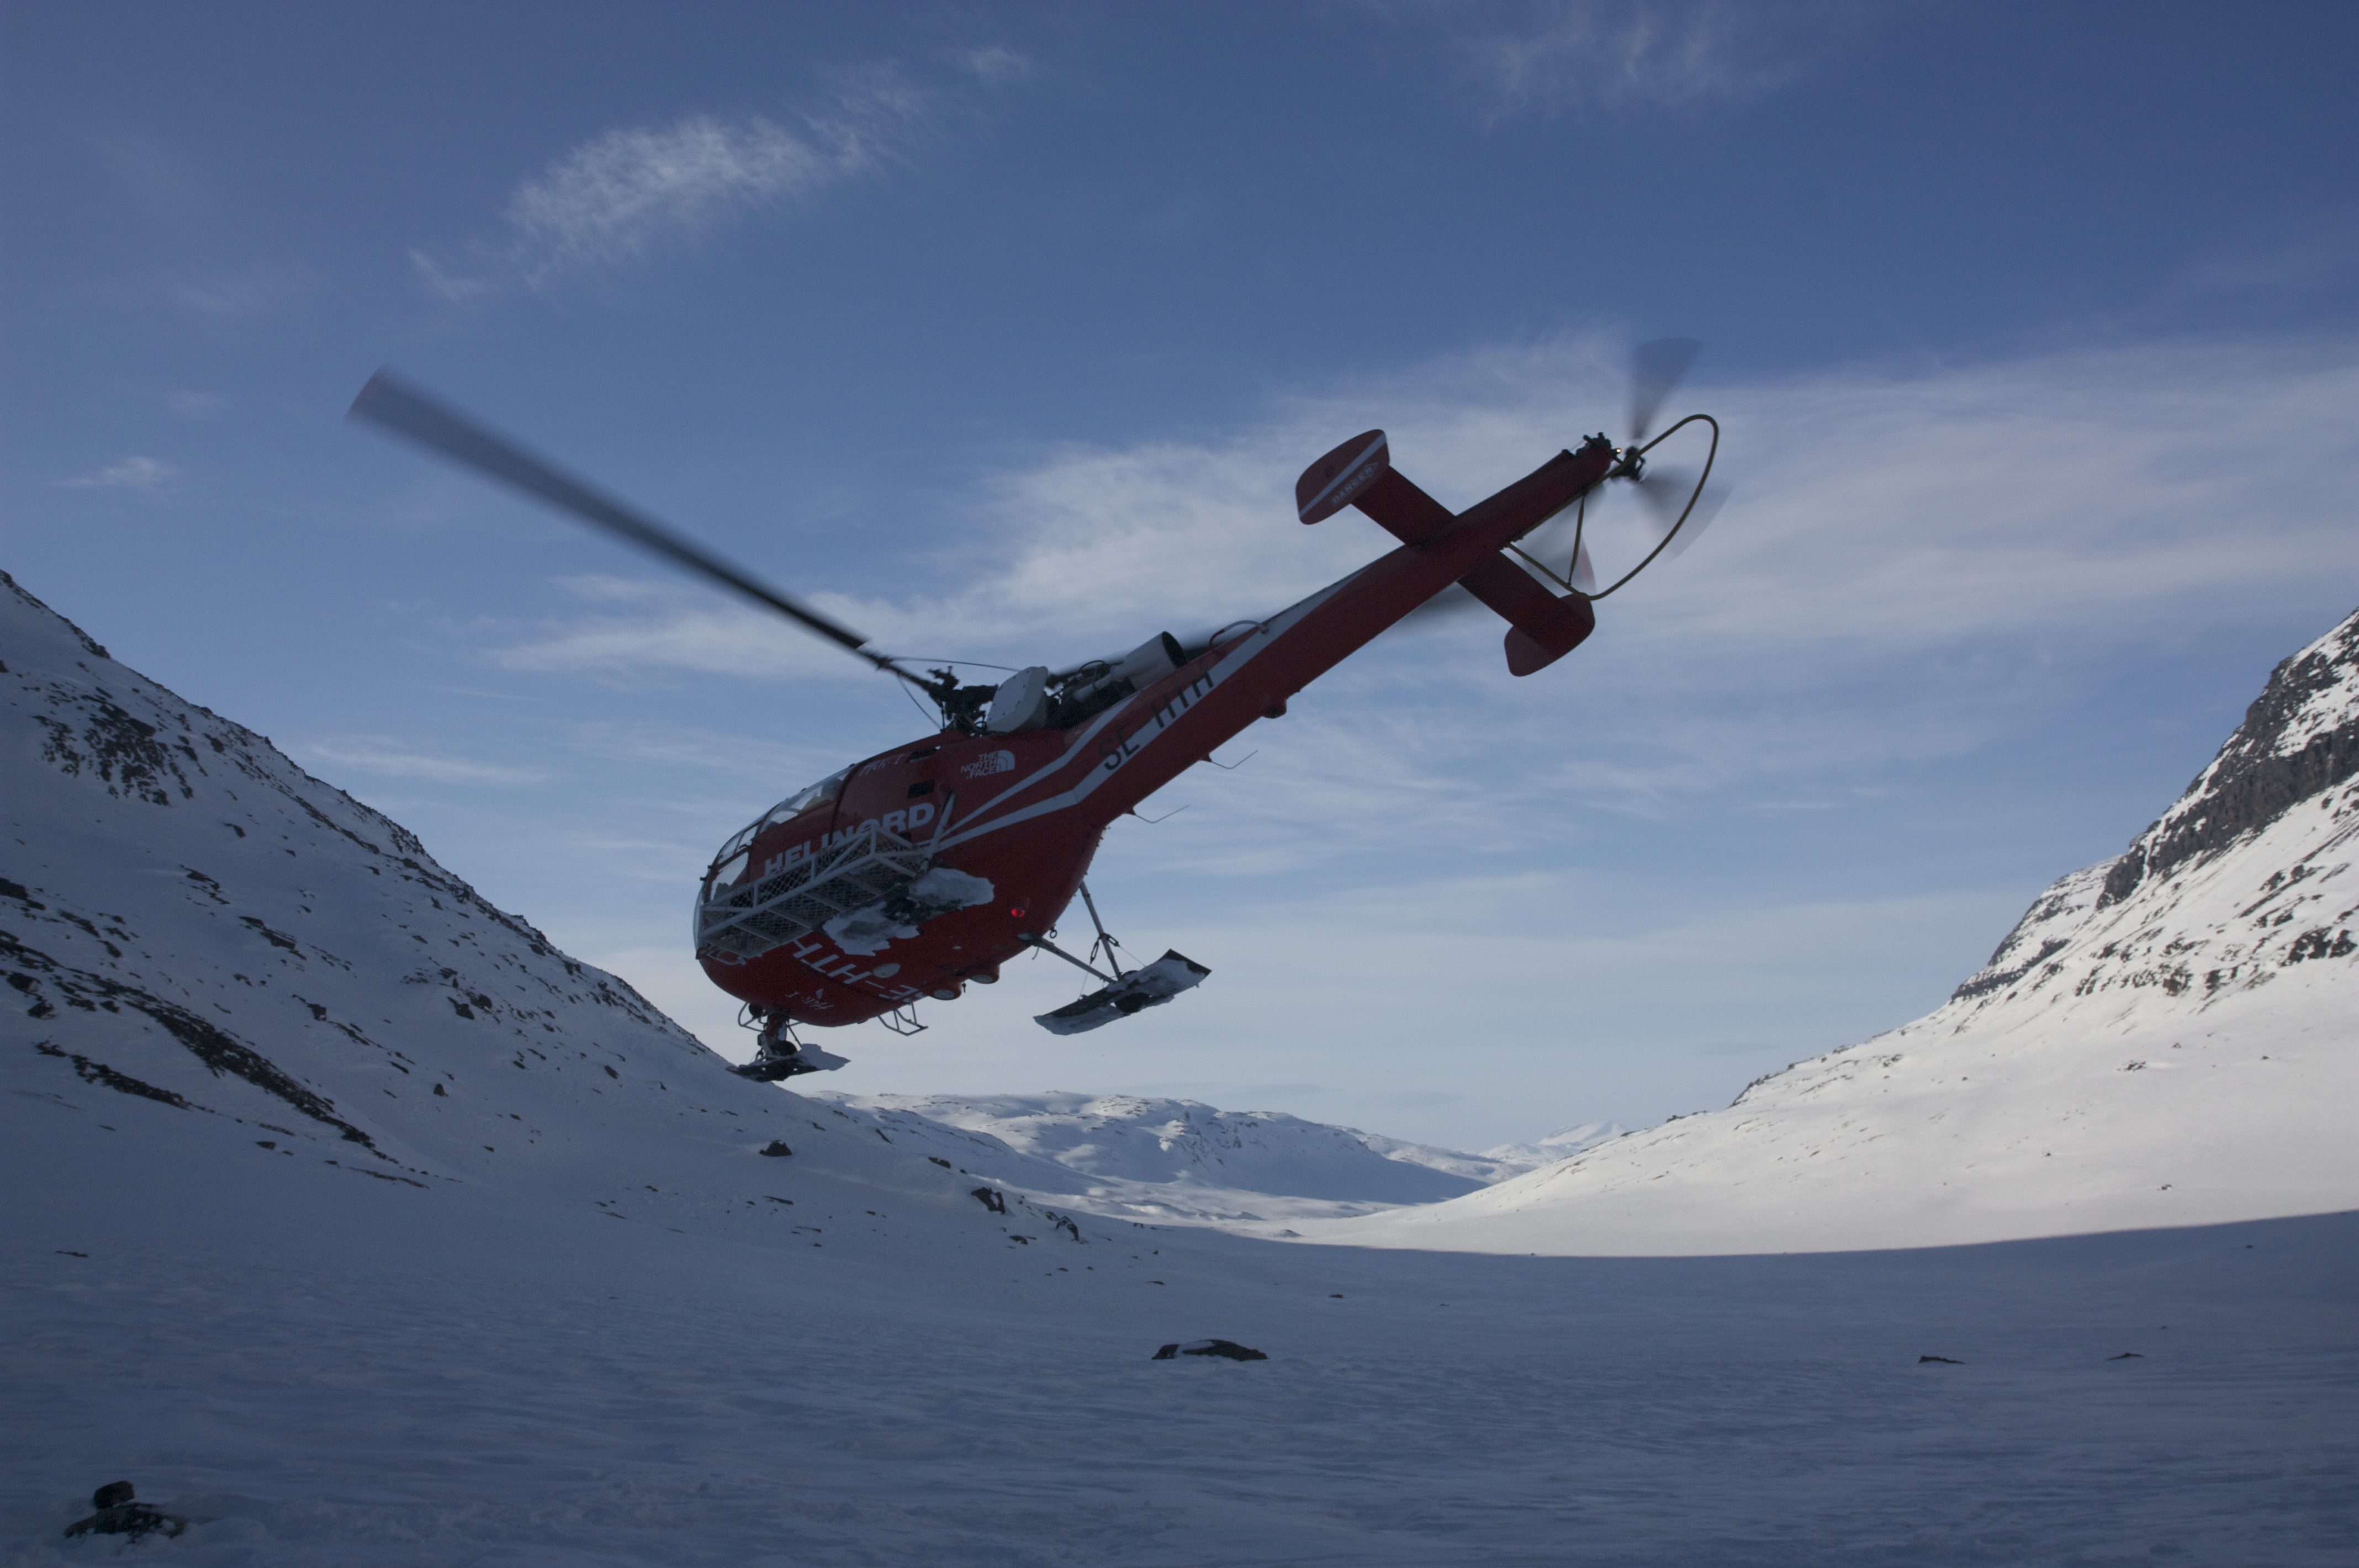 The french lady making heli lift number 9 April 11th 2009. Photo: Carl Lundberg 